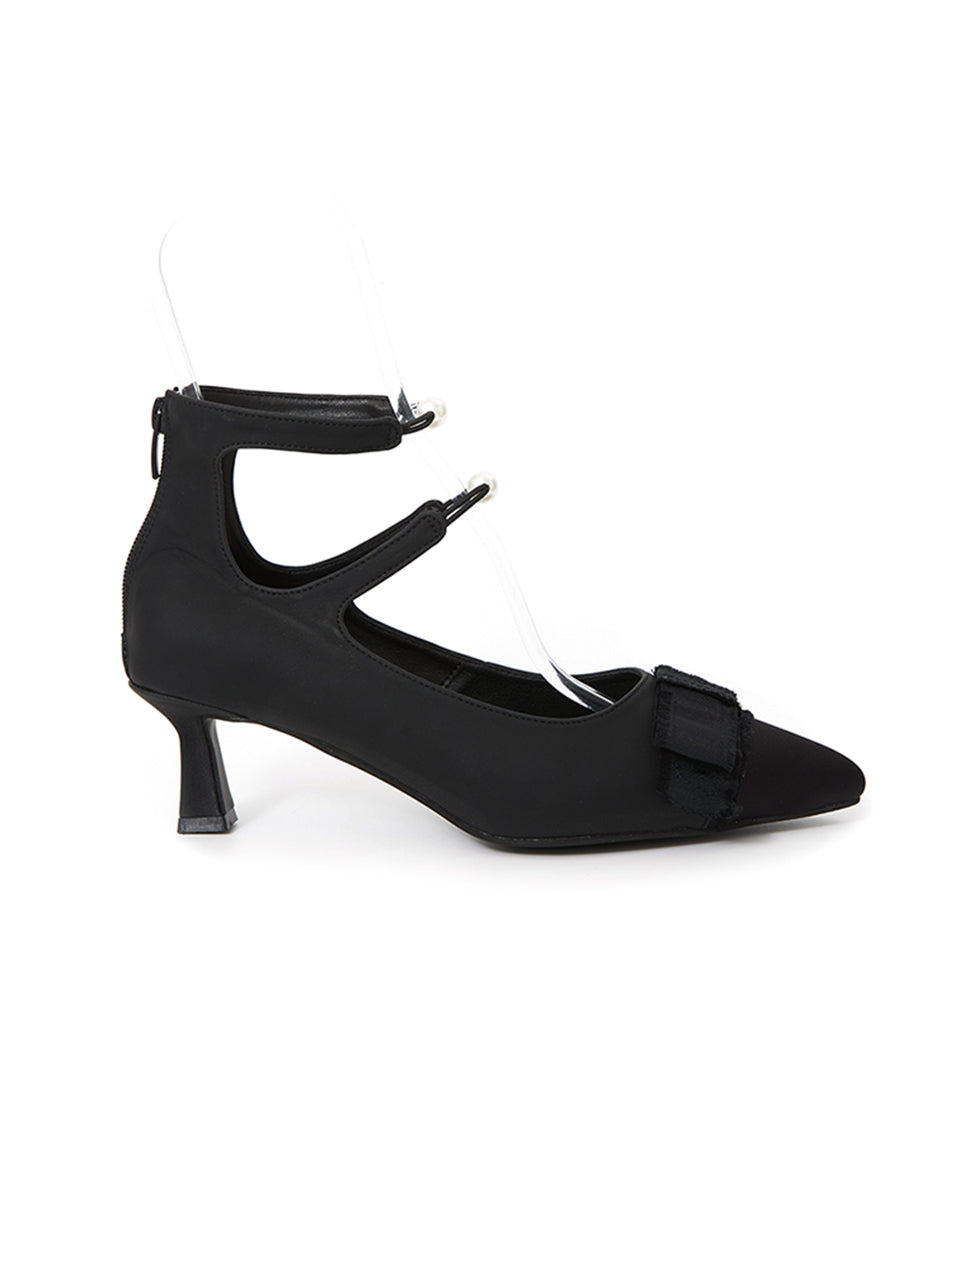 AR-3259 Ribbon Middle Heeled Pumps